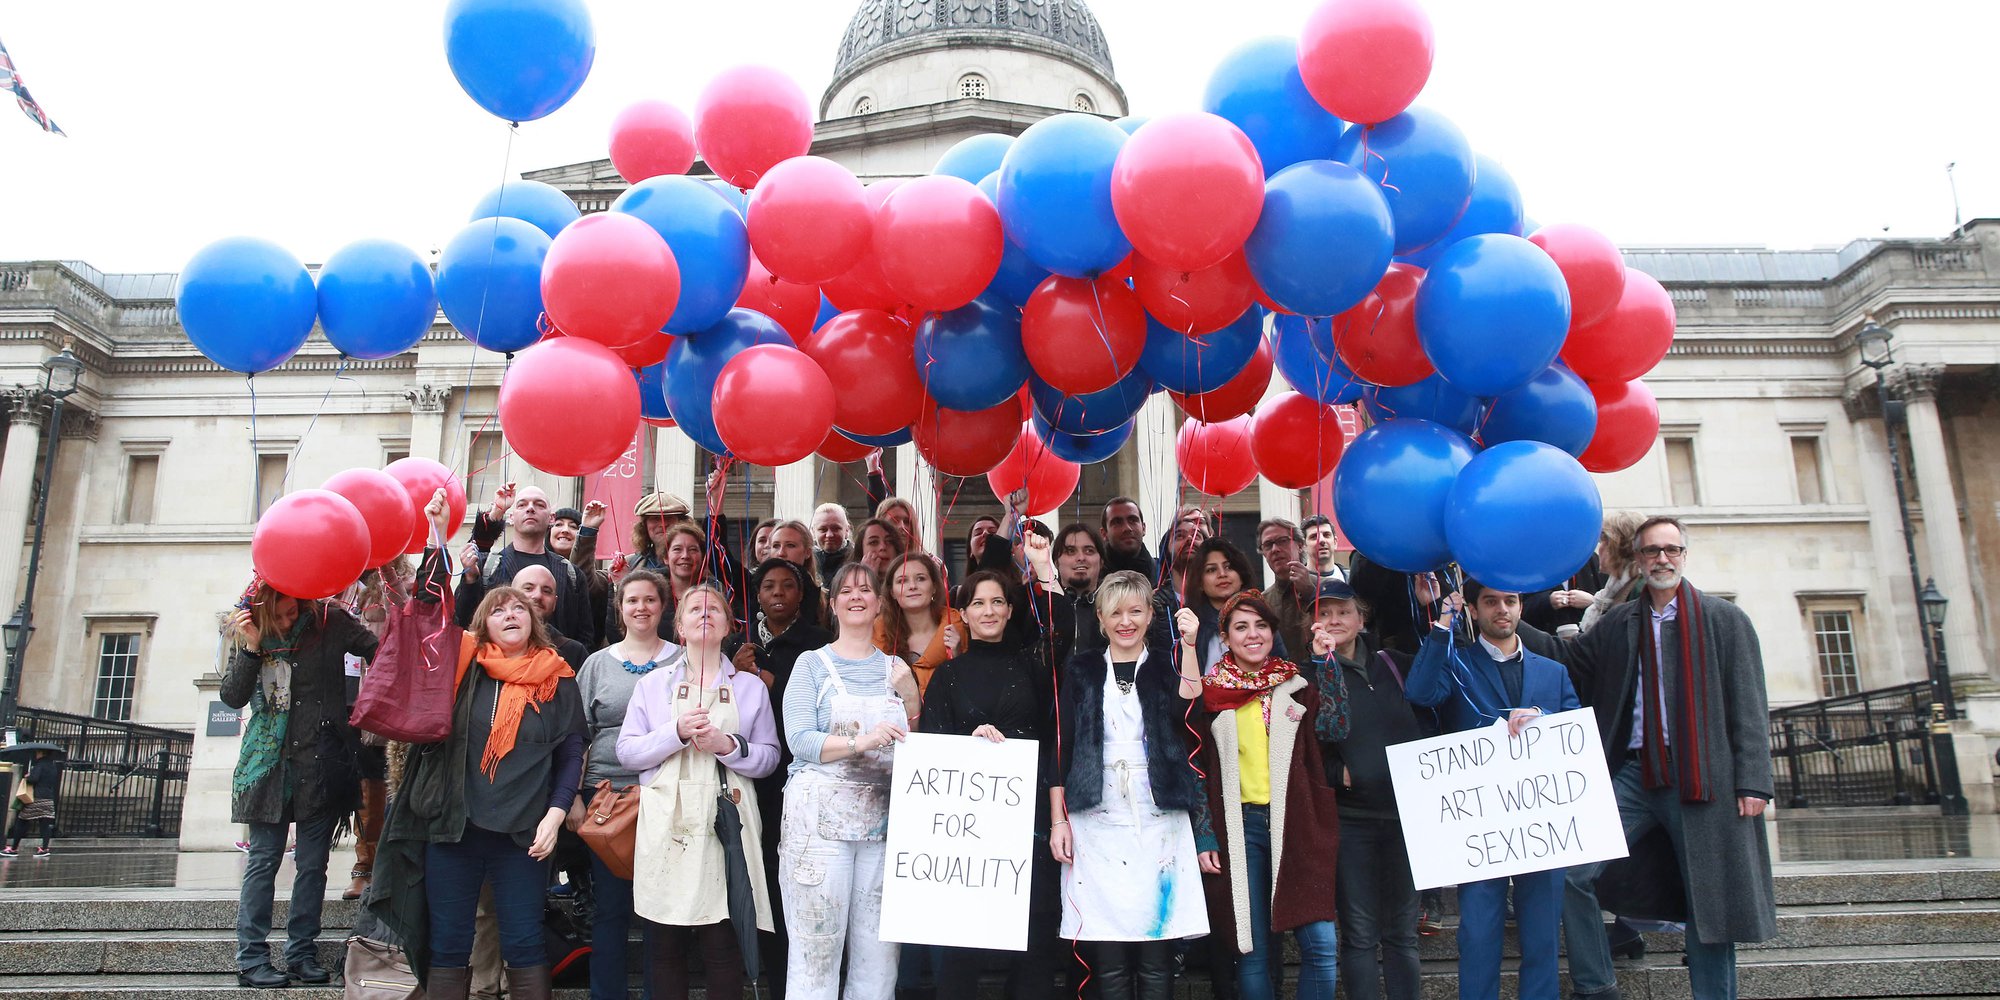 100 artists. 100 balloons. We came, we saw, we stood up for gender equality!